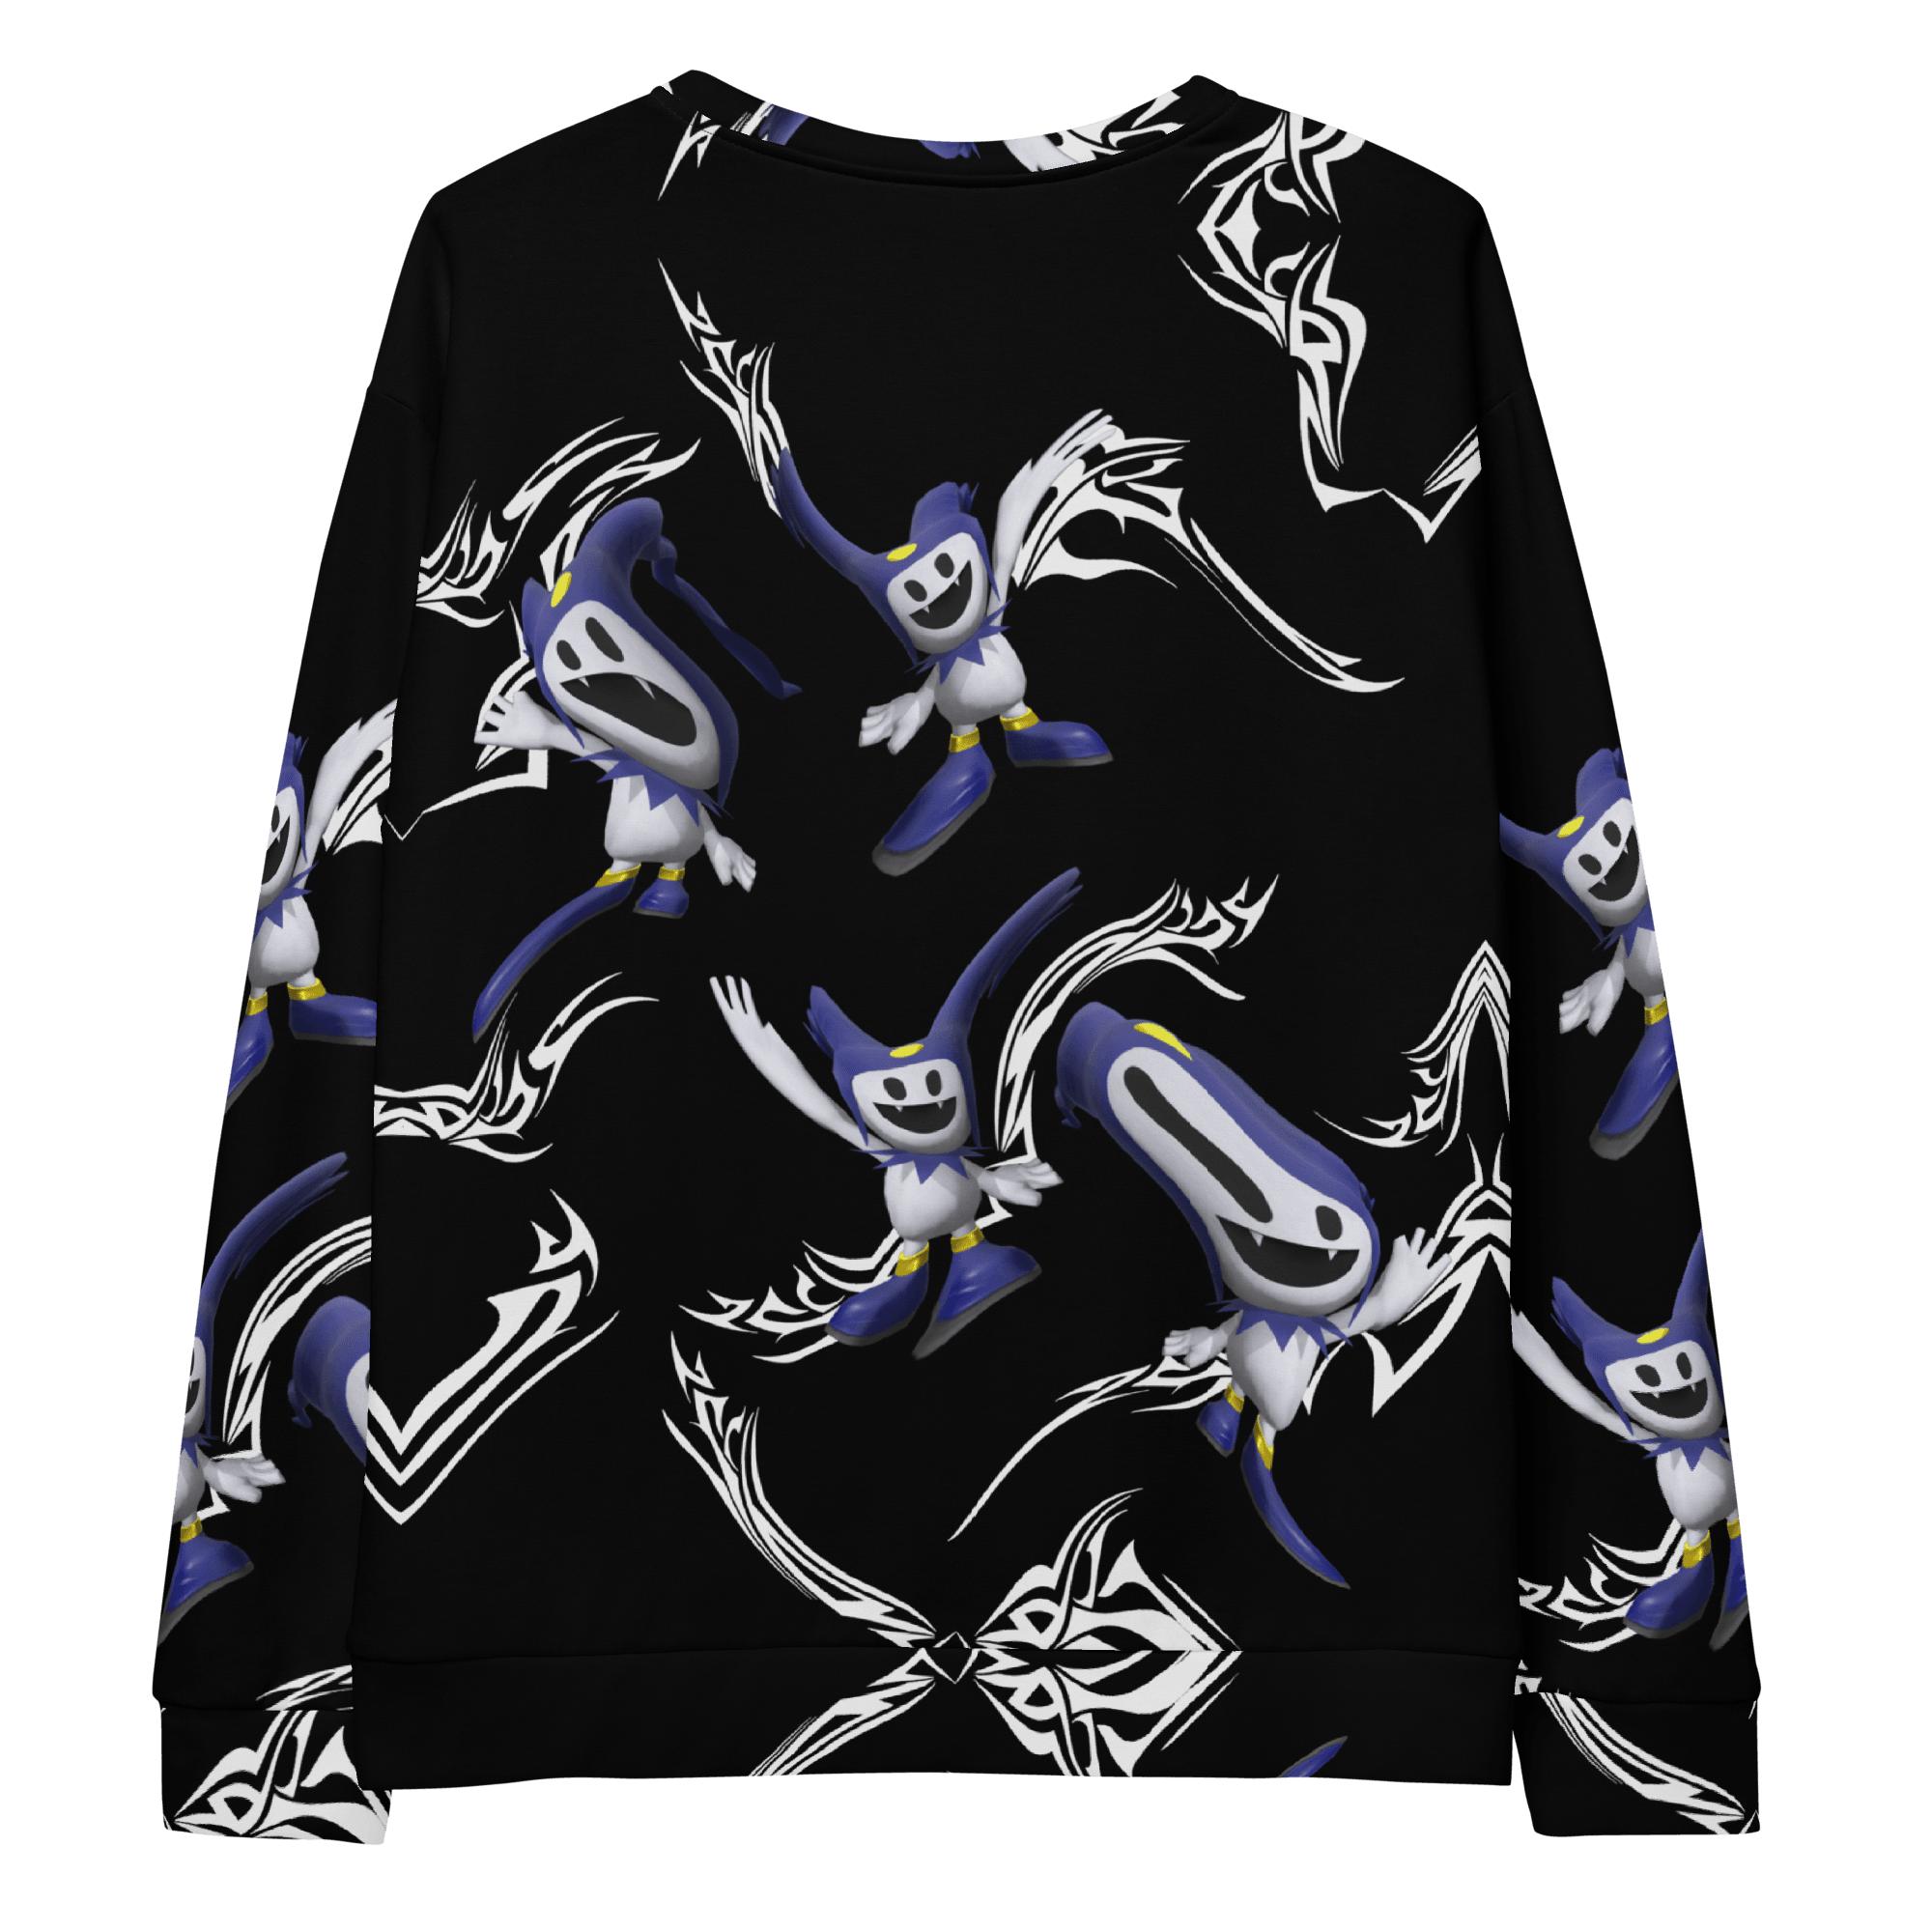 Thursday® Deluxe Sweatshirt (only 8 for sale) - Kikillo Club